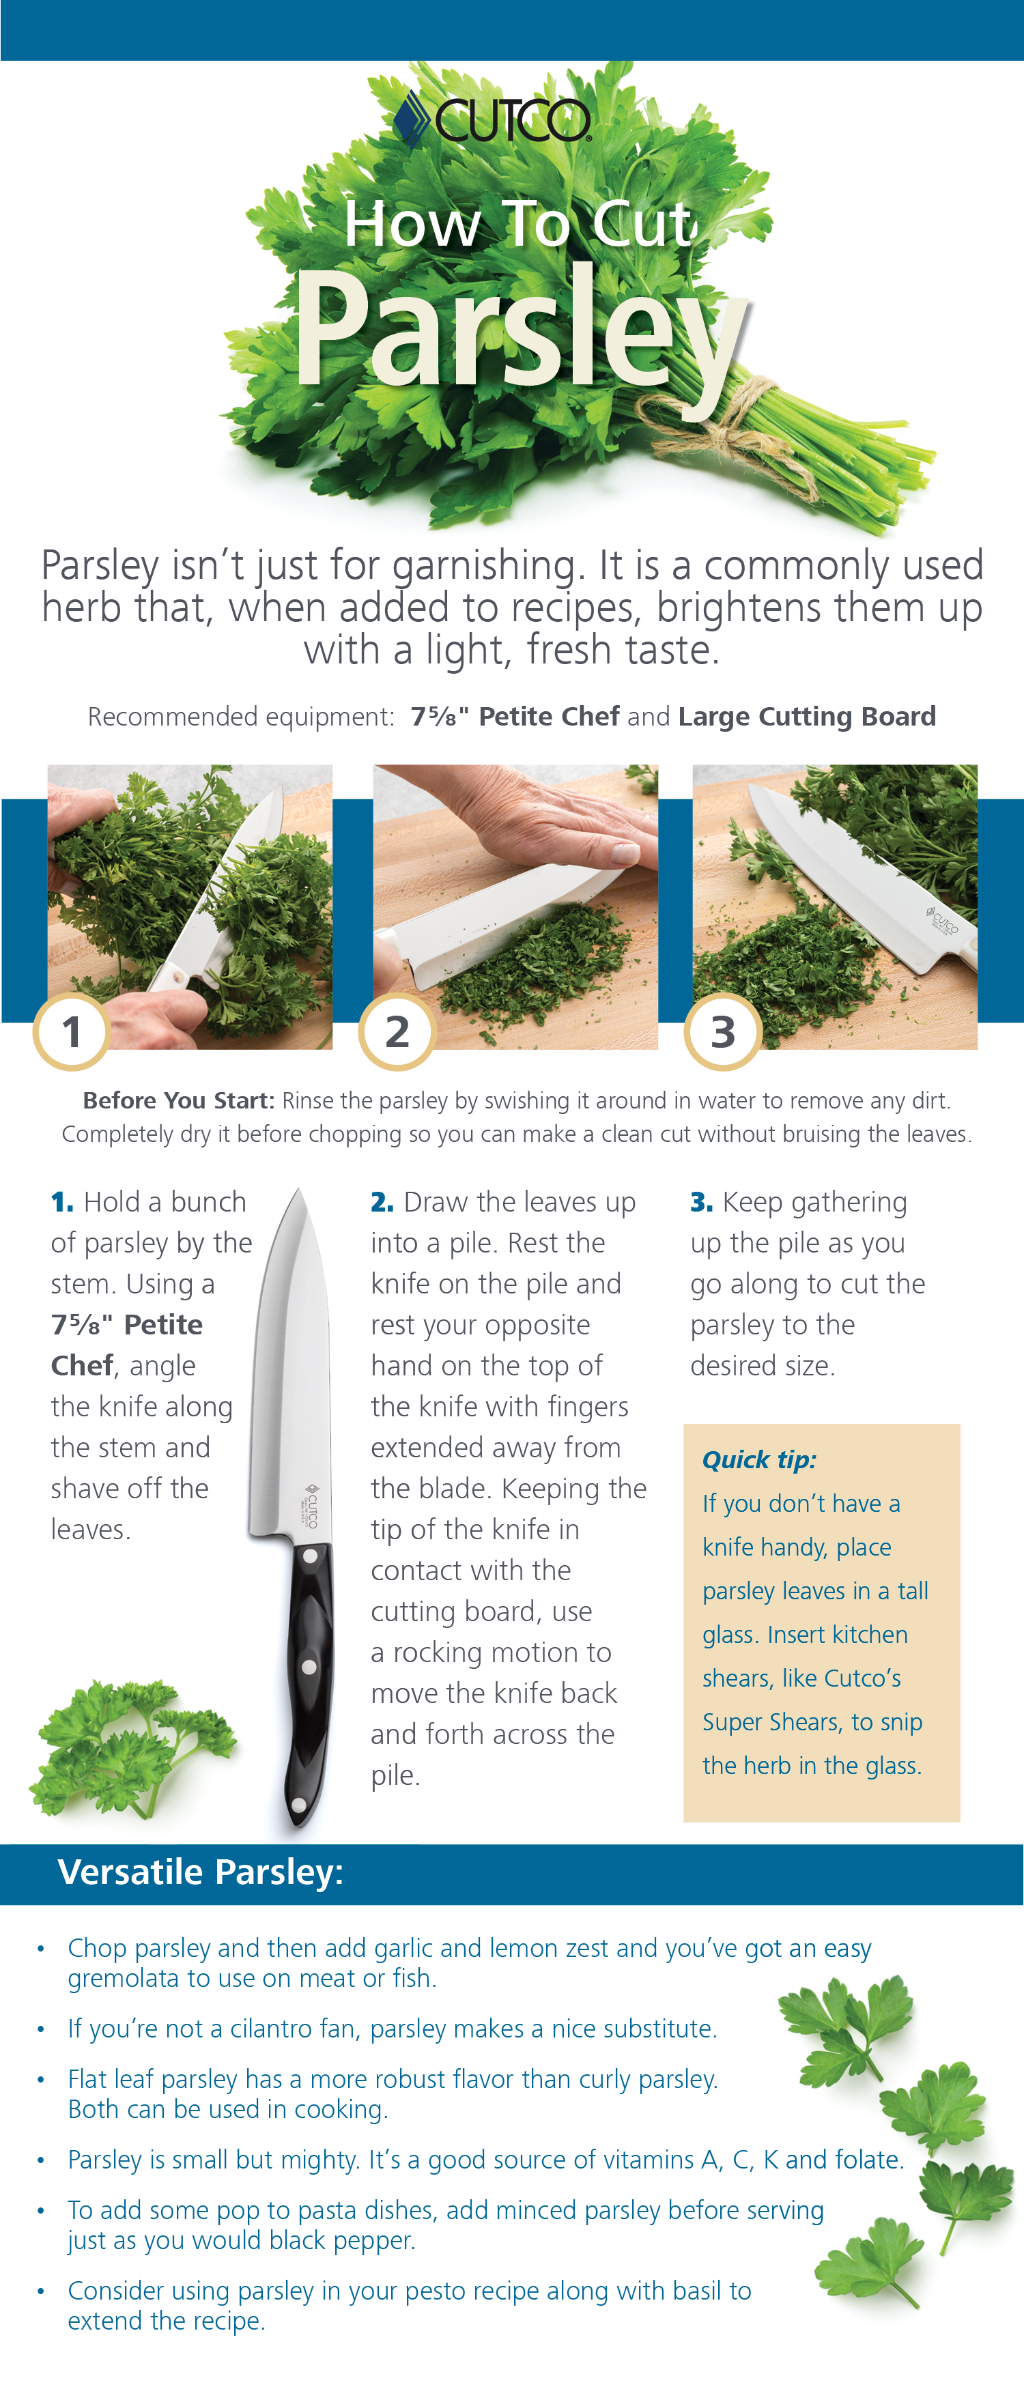 https://images.cutco.com/learn/2019/parsley-infographic-l.png